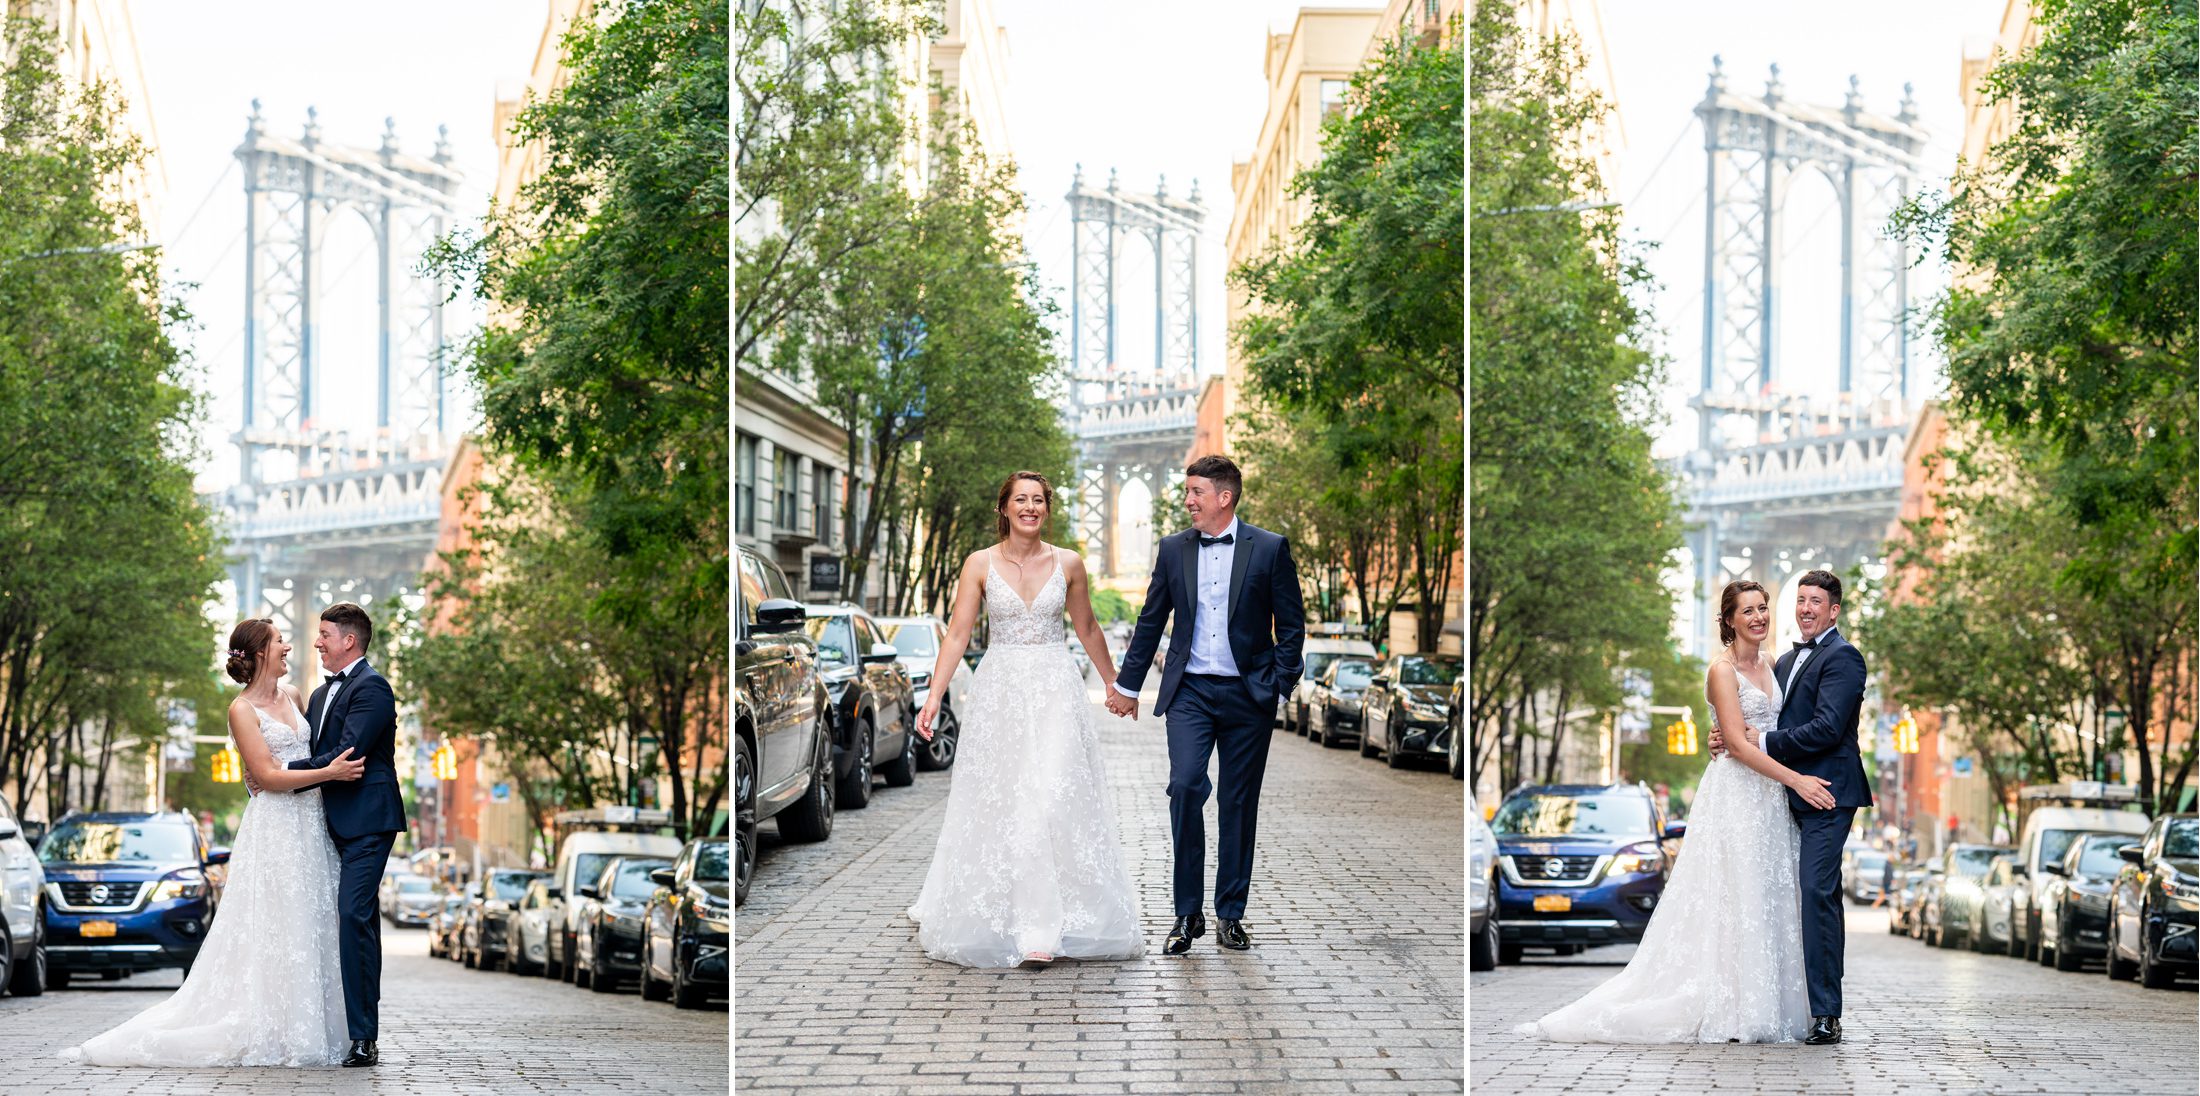 Bride and groom on the street in Dumbo Brooklyn 